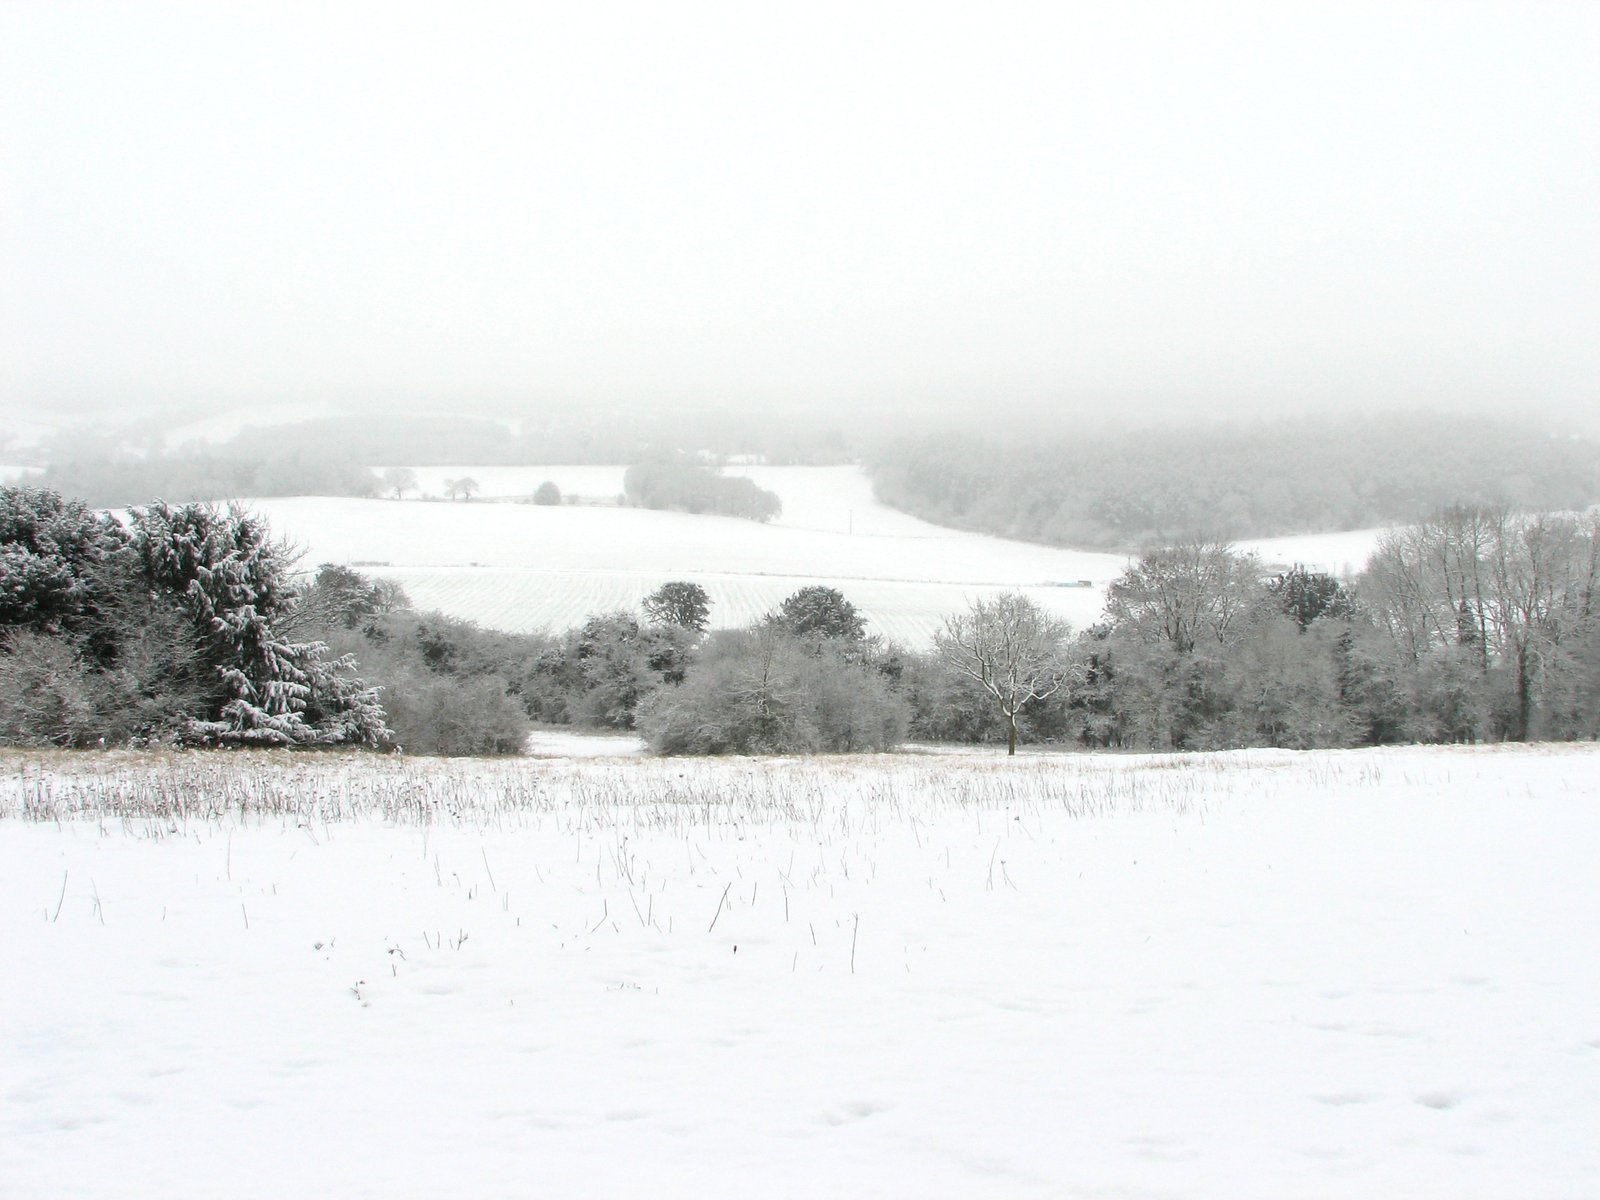 an image of snowy field landscape on a foggy day